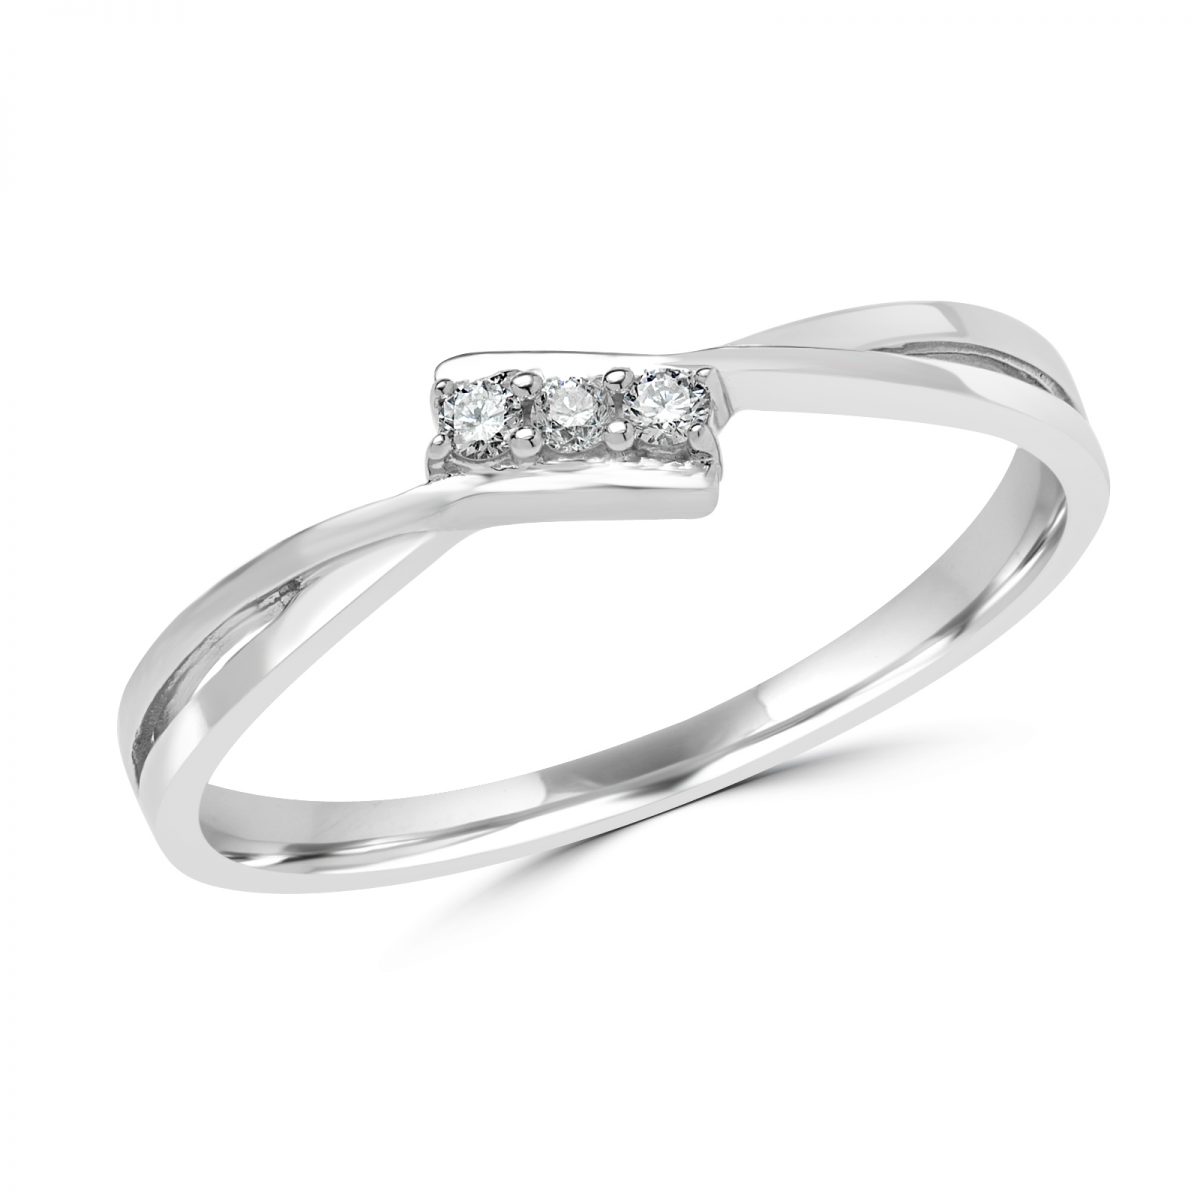 Charming 3 stone promise ring in 10k white gold 0.05 (ctw)